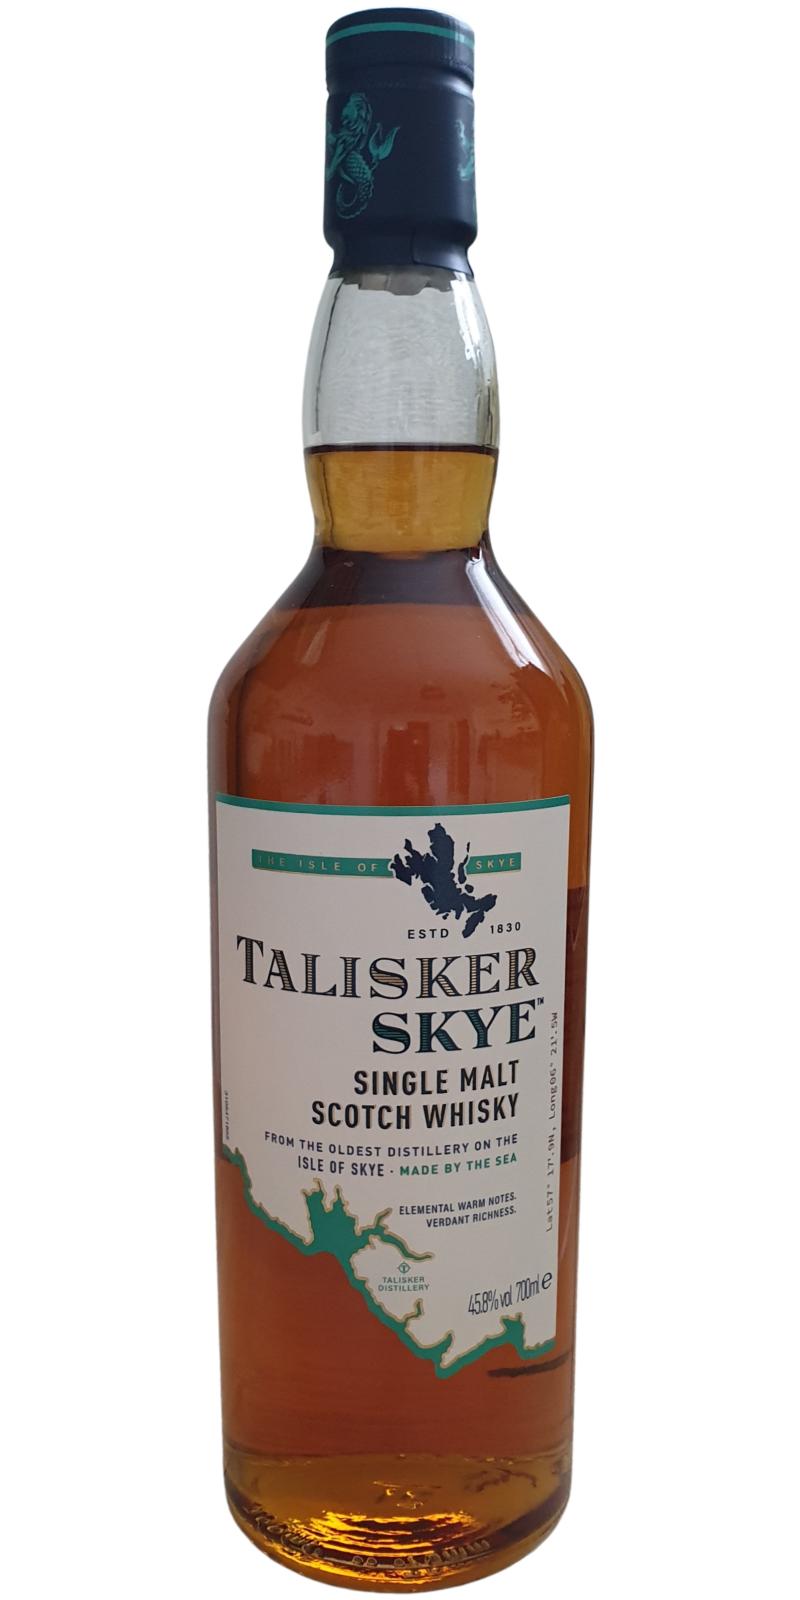 Talisker Skye edition limitee From the Oldest Distillery on the Isle of Skye 45.8% 700ml